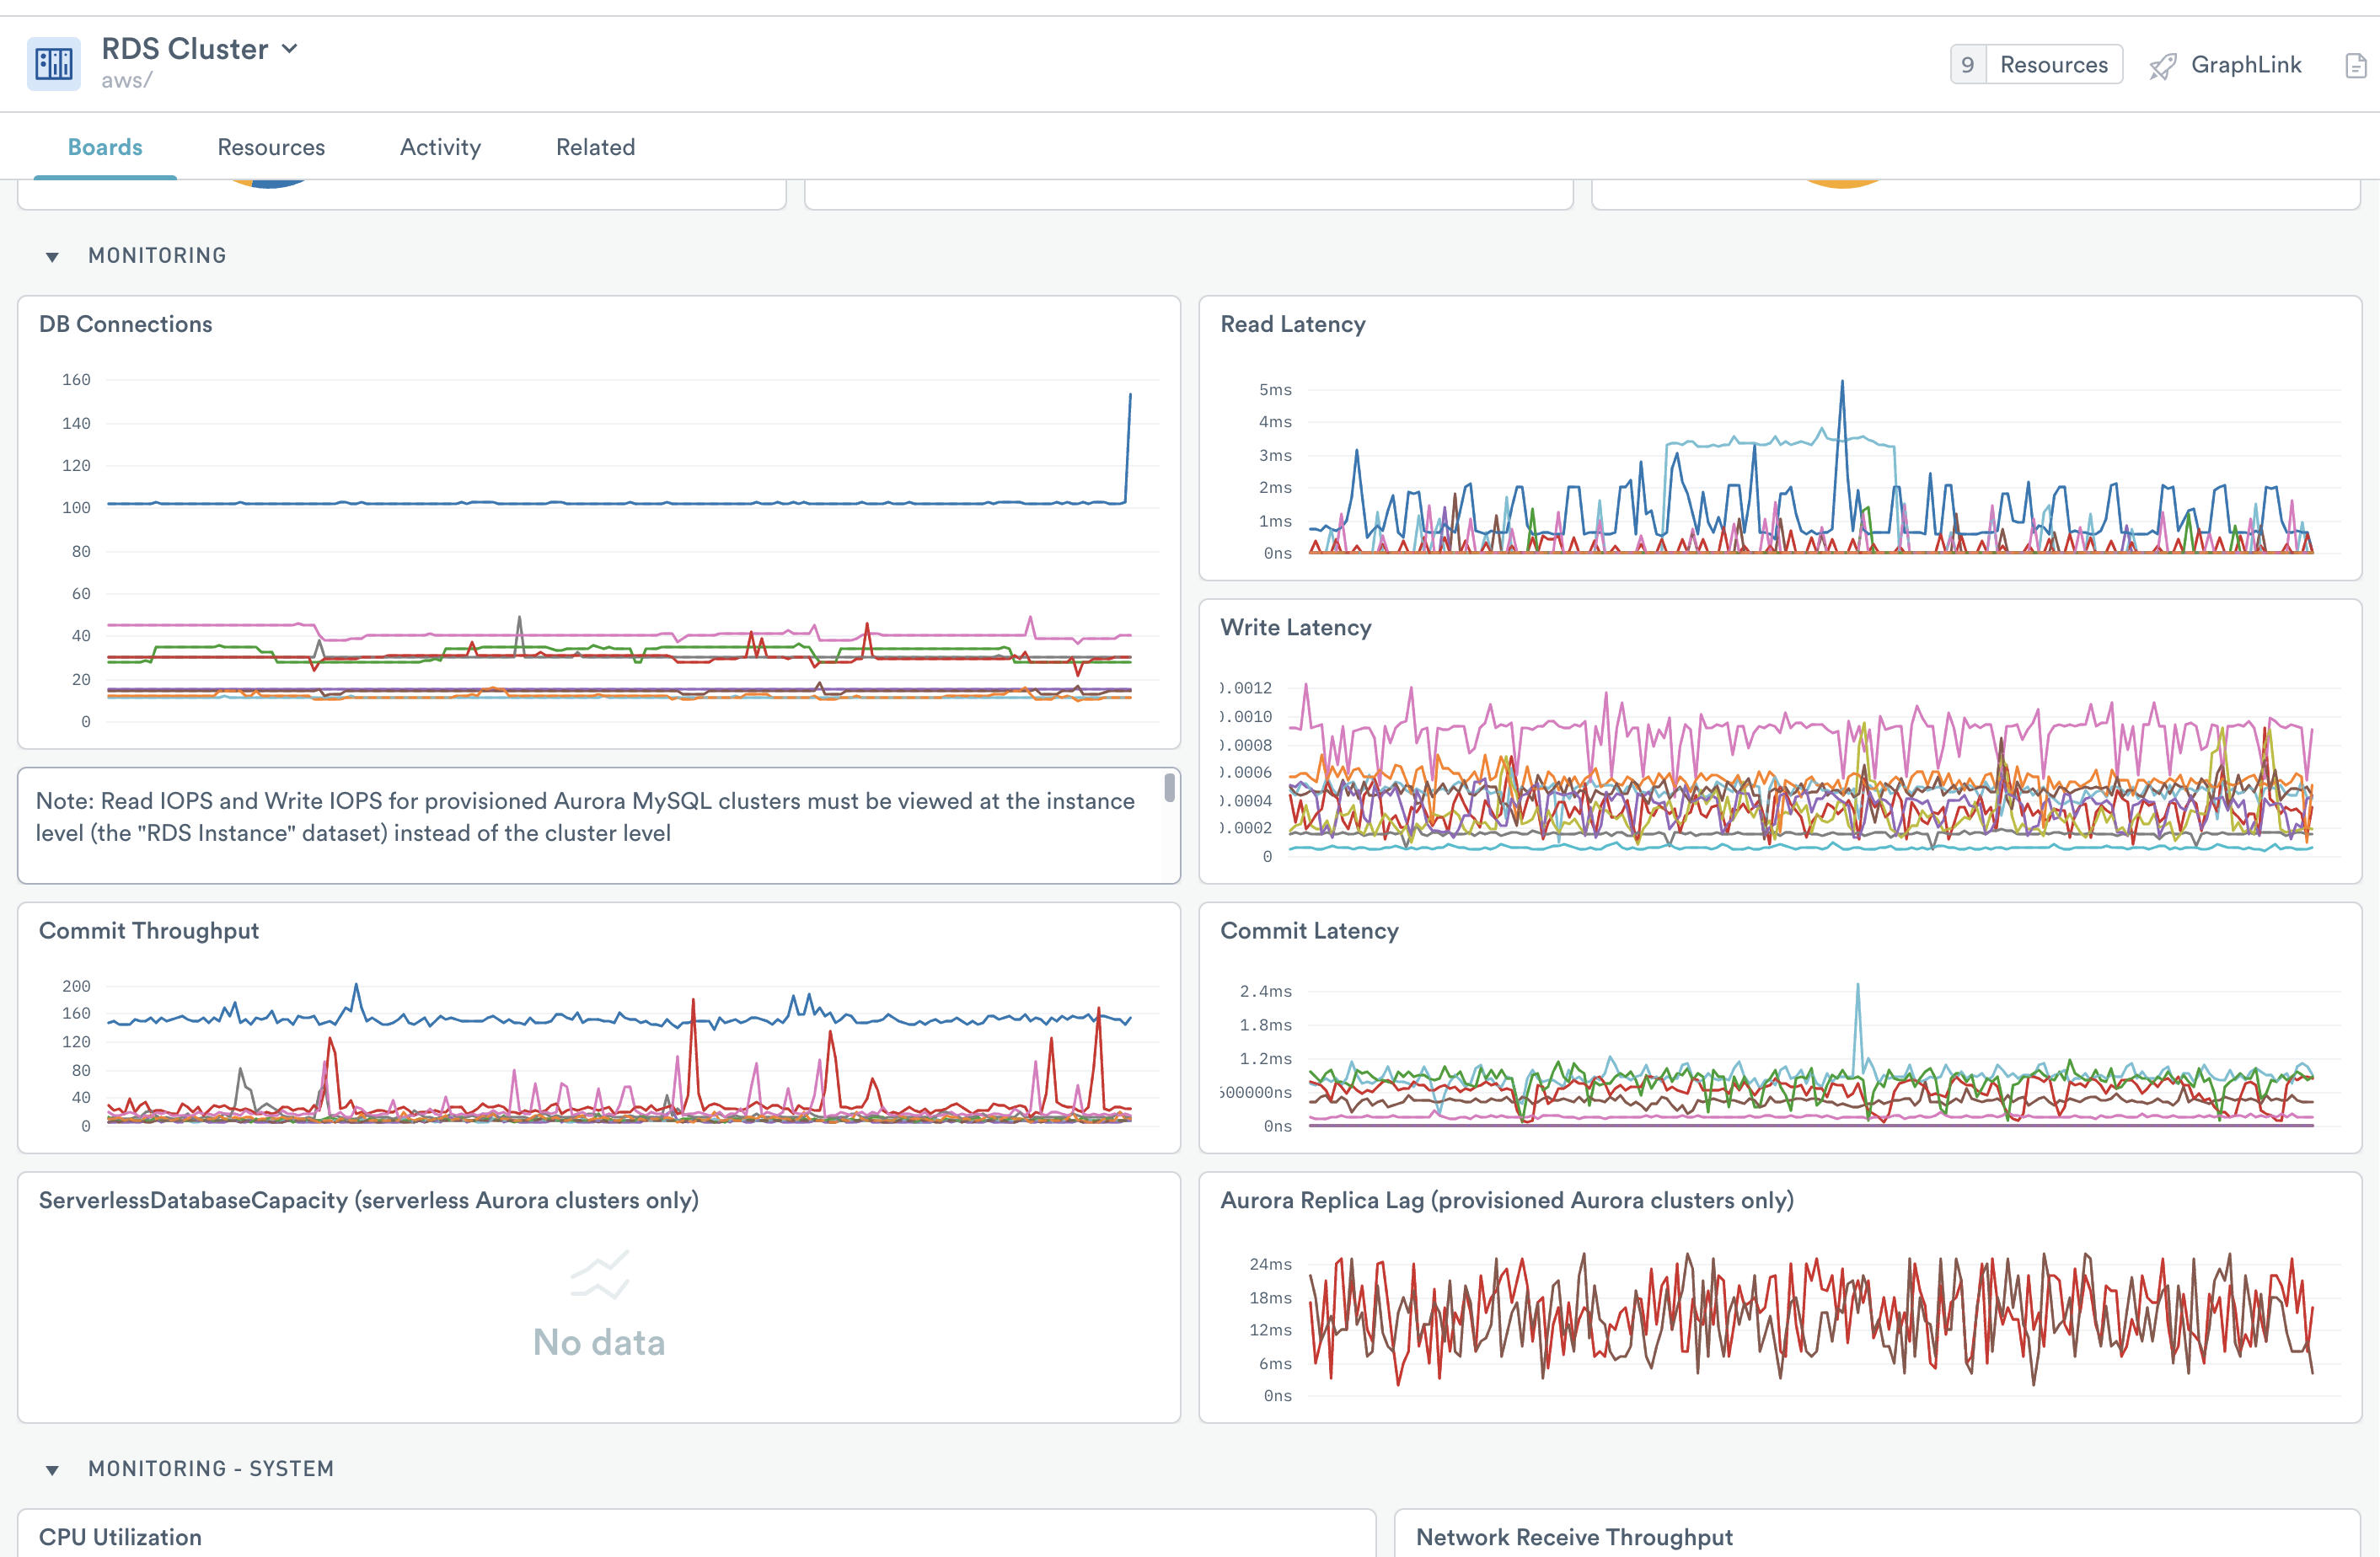 Dashboard for the RDS Instance resource dataset. Visualizations include summaries of instance types, charts of how many instances are in each availability zone, how many failed status checks, and CPU utilization per instance.